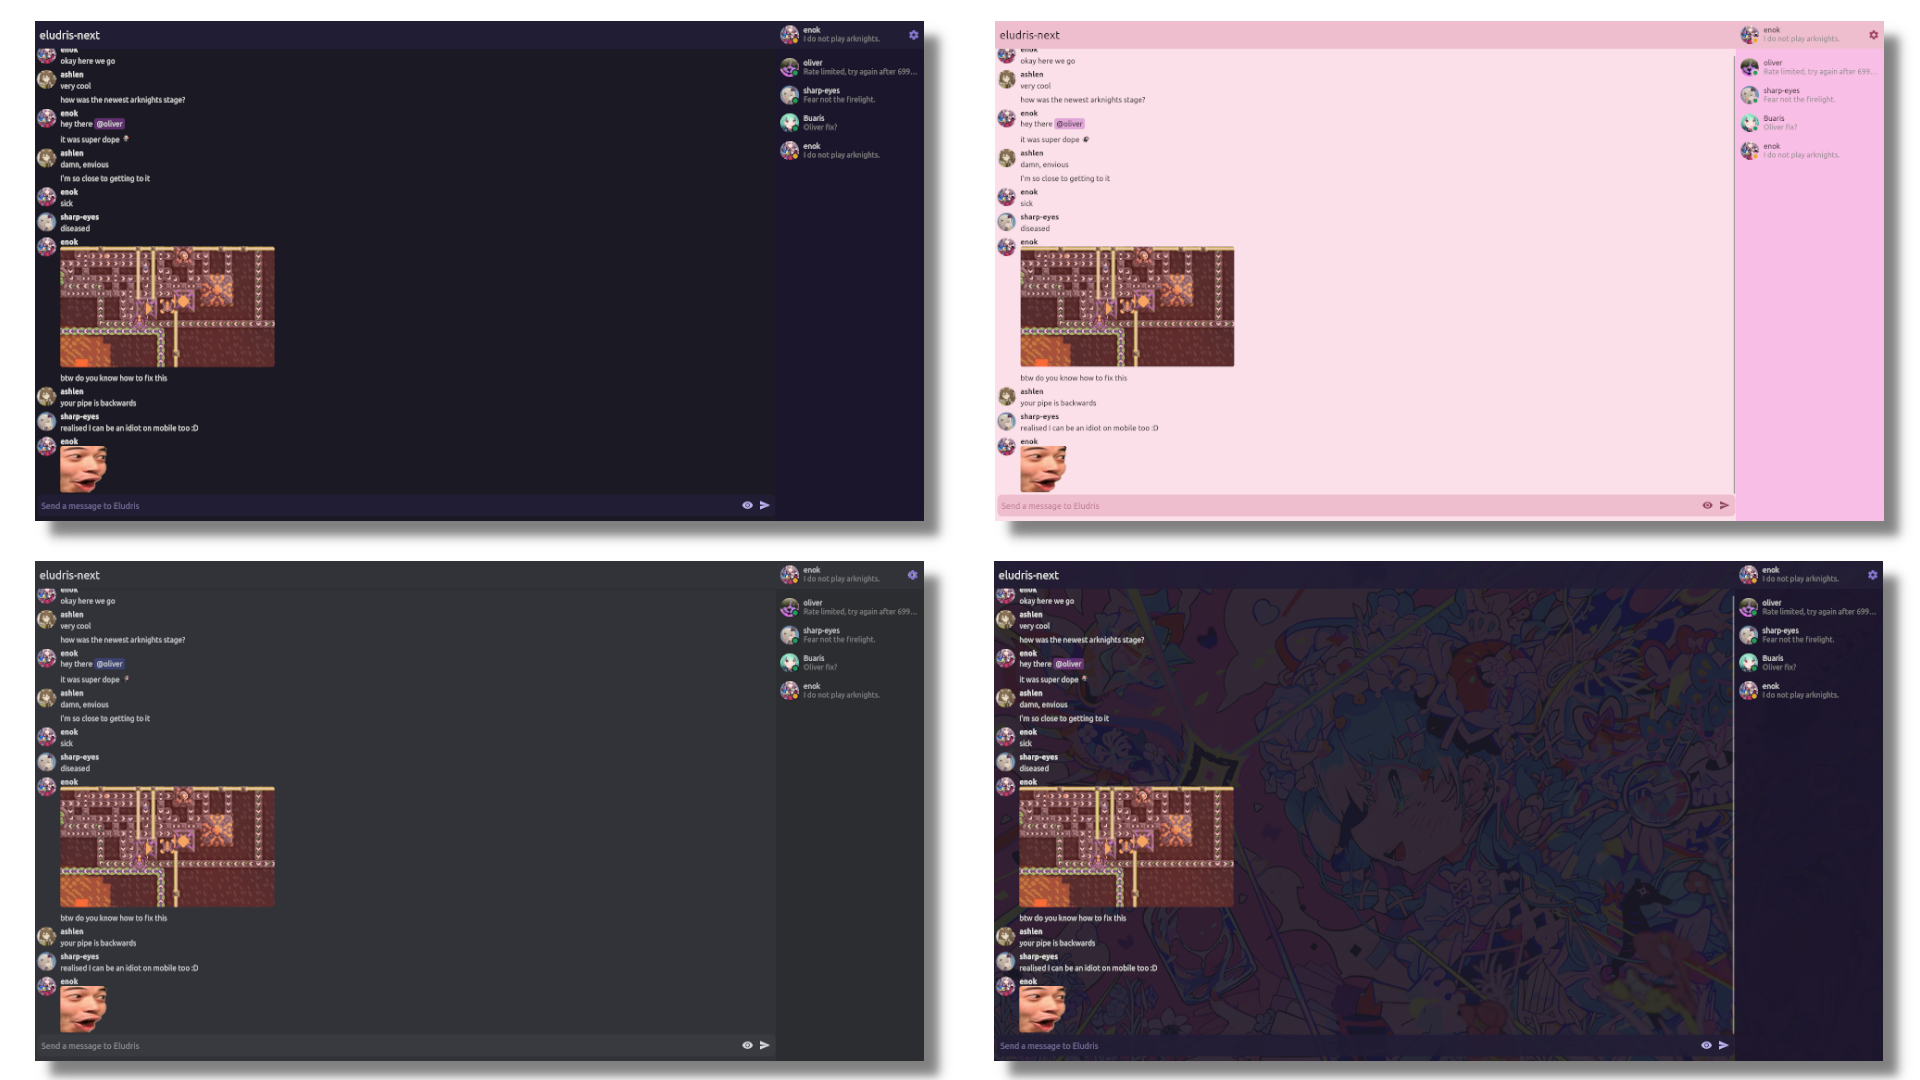 An assortment of different built-in and community-provided Eludris client themes